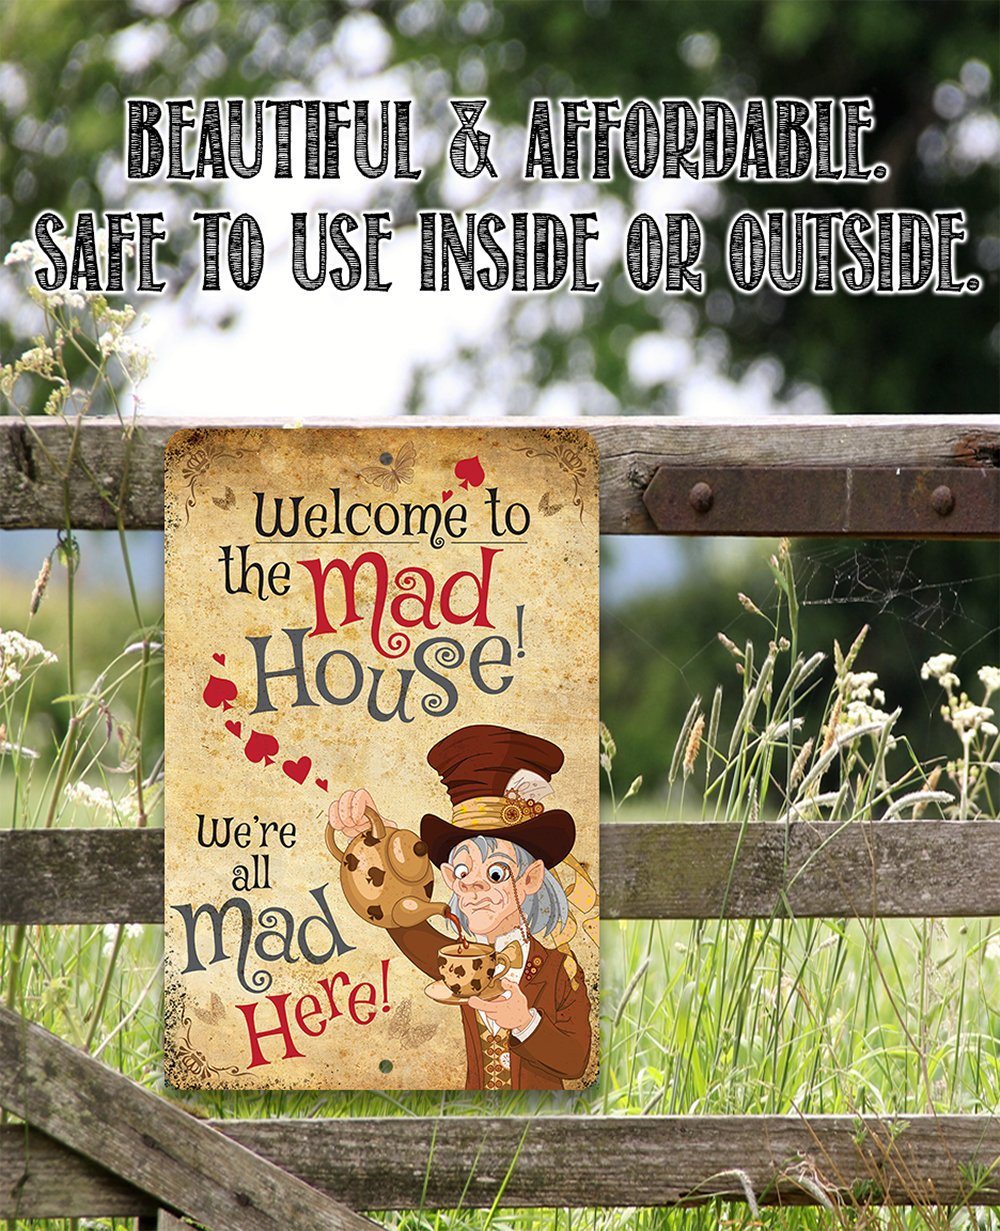 Alice in Wonderland - Welcome to the Mad House - Metal Sign | Lone Star Art.